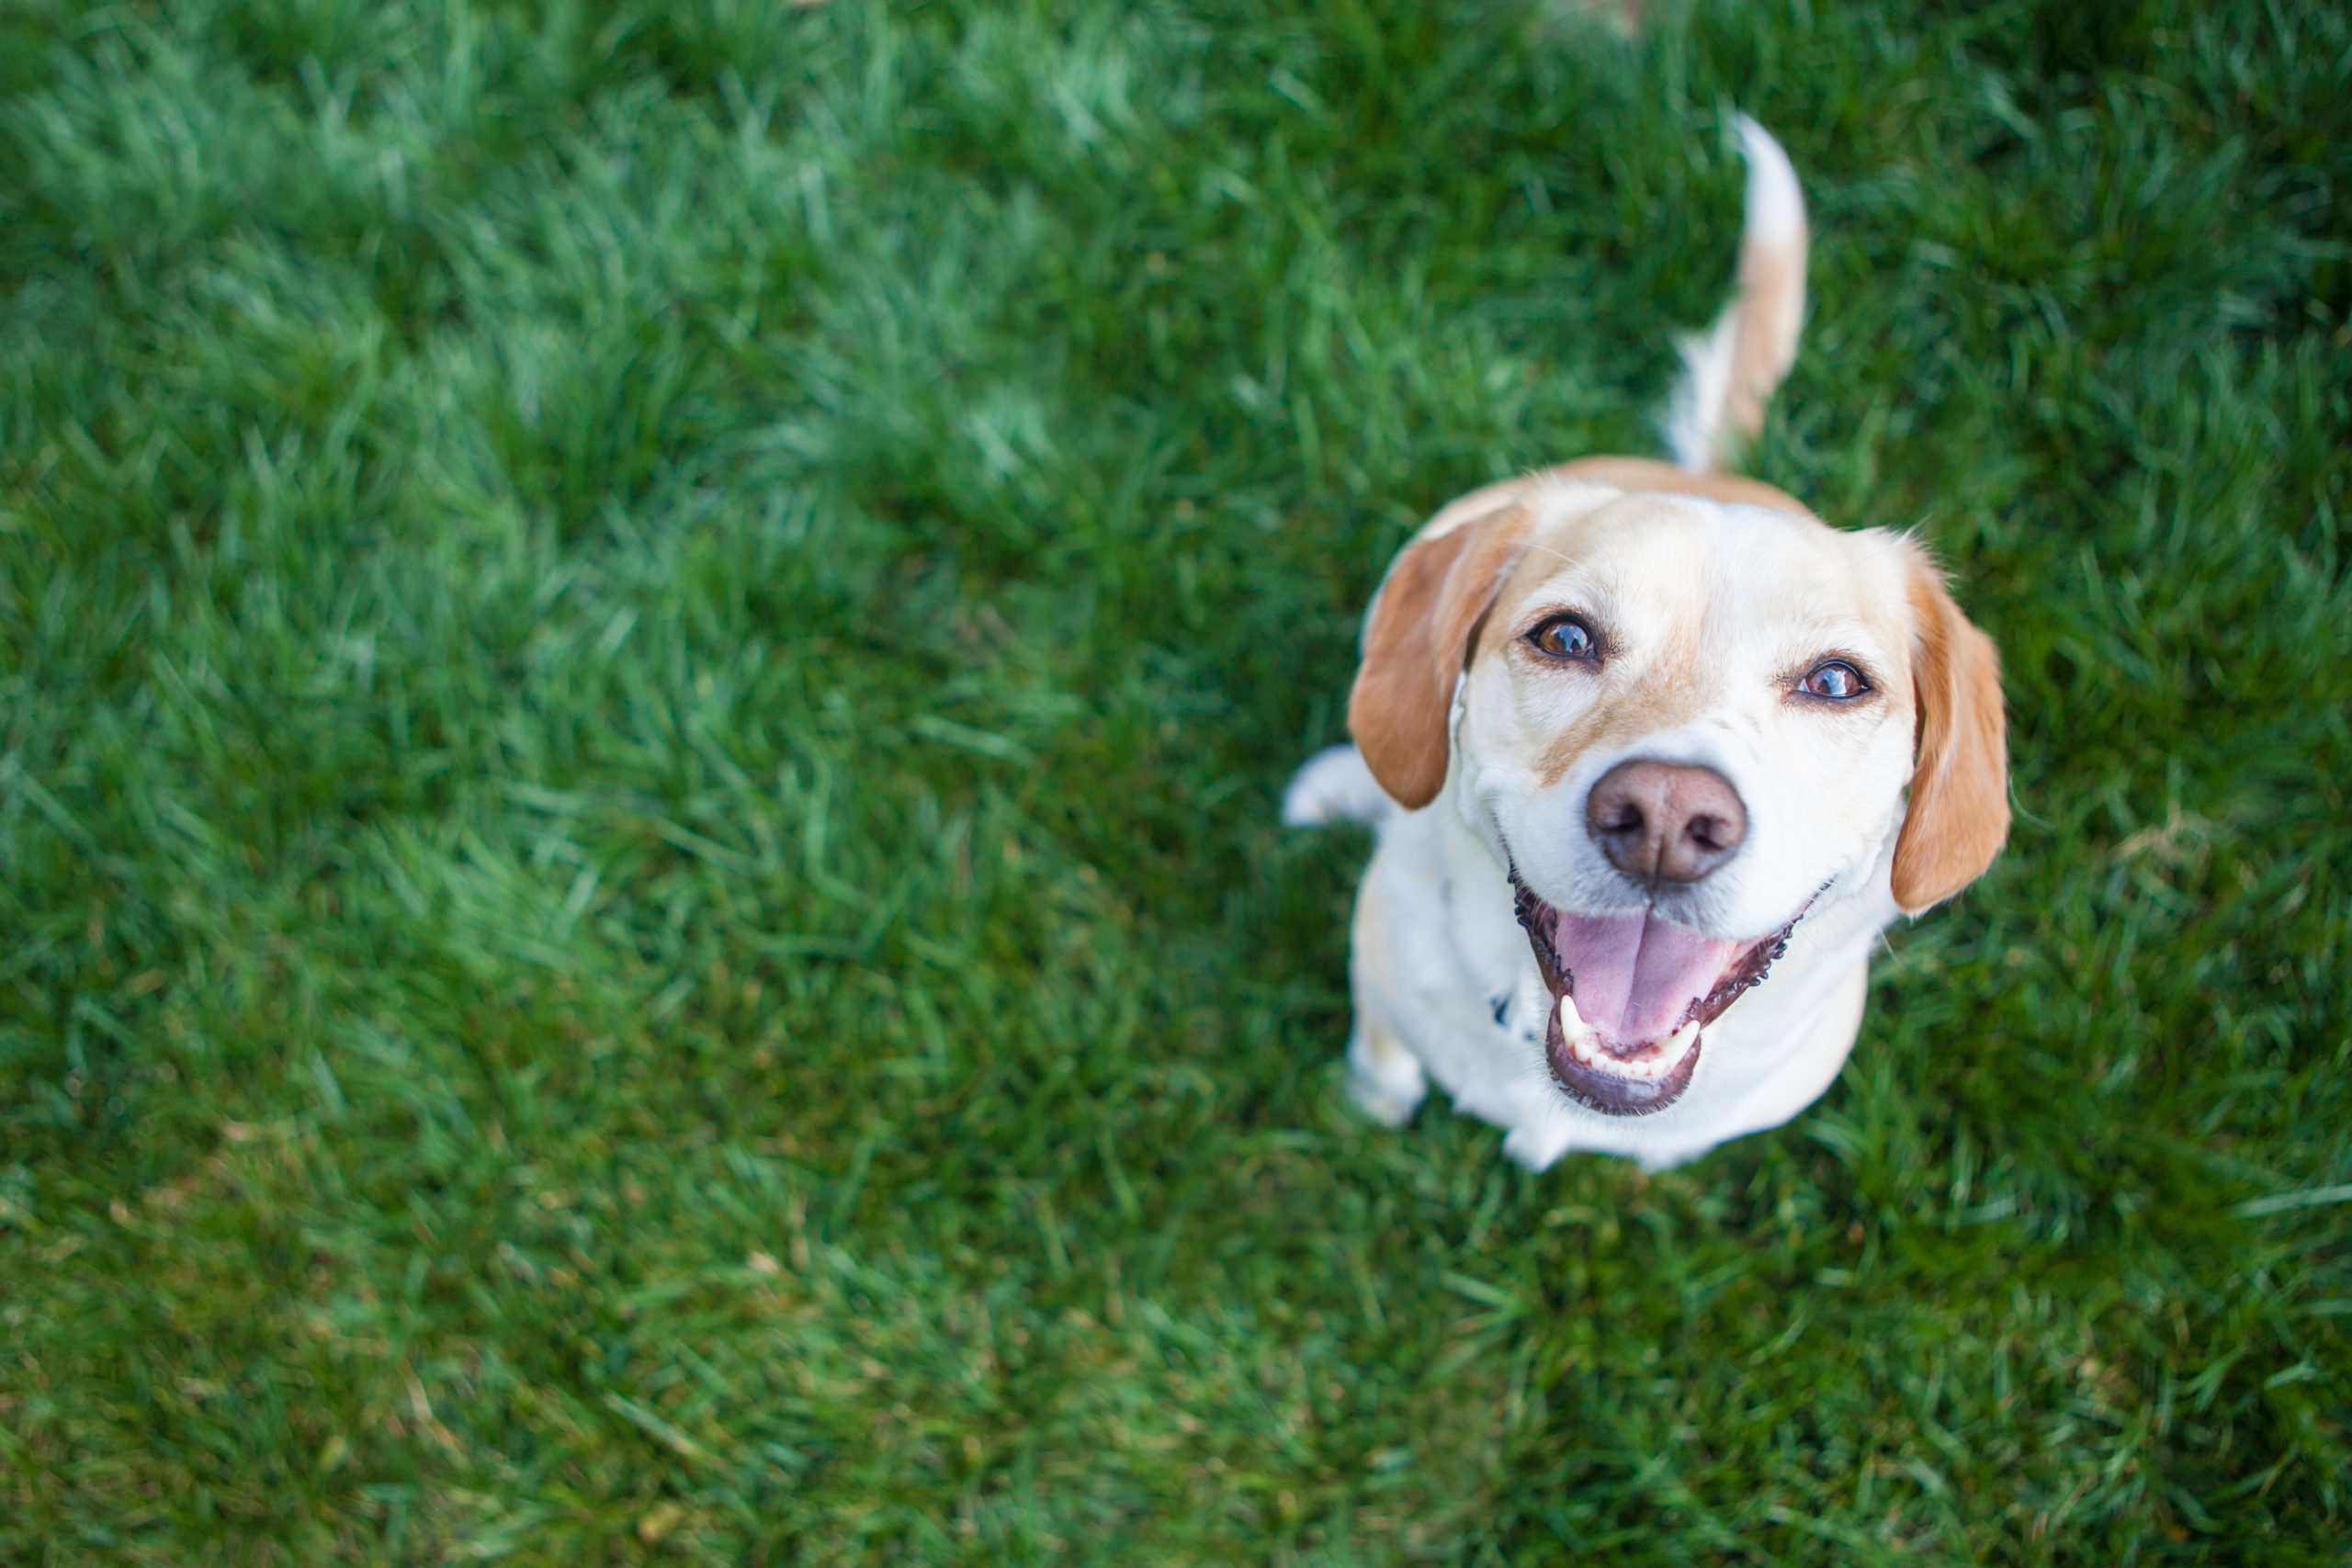 Protect Your Pet: 4 Steps to Create an Estate Plan for Your Pet